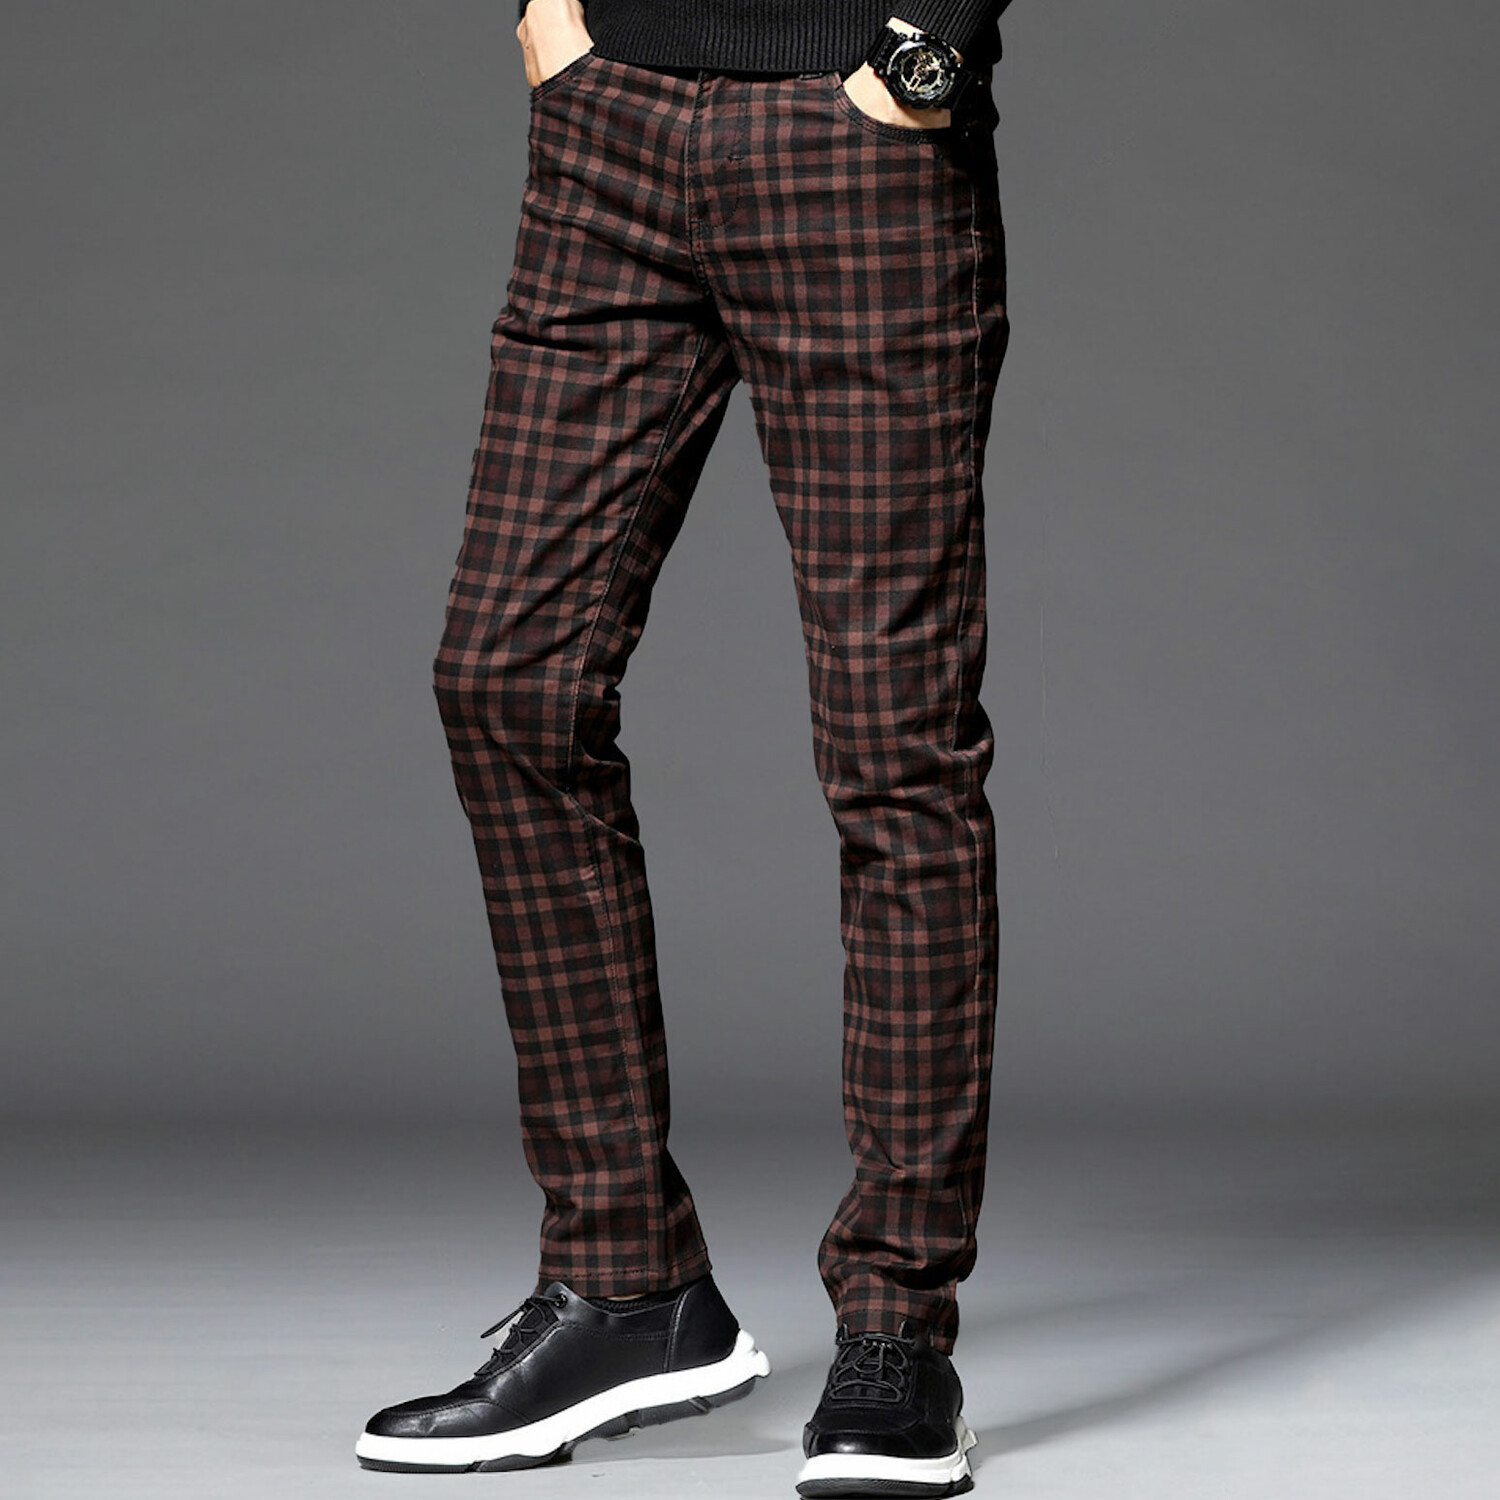 Plaid Chino Pants // Brown (33) - Celino Chino Pants - Touch of Modern